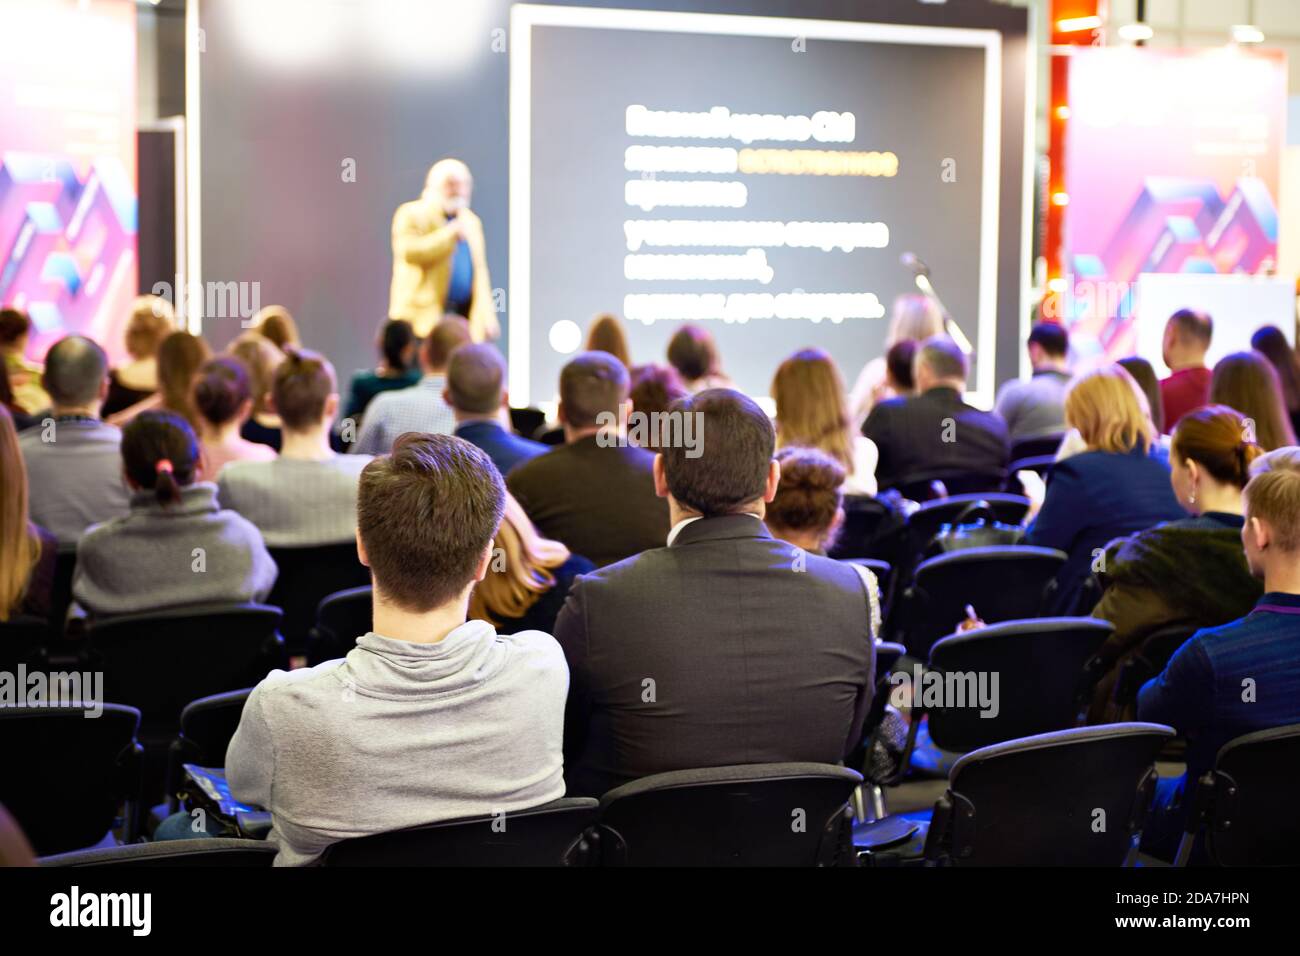 People at a training lecture at a business conference Stock Photo